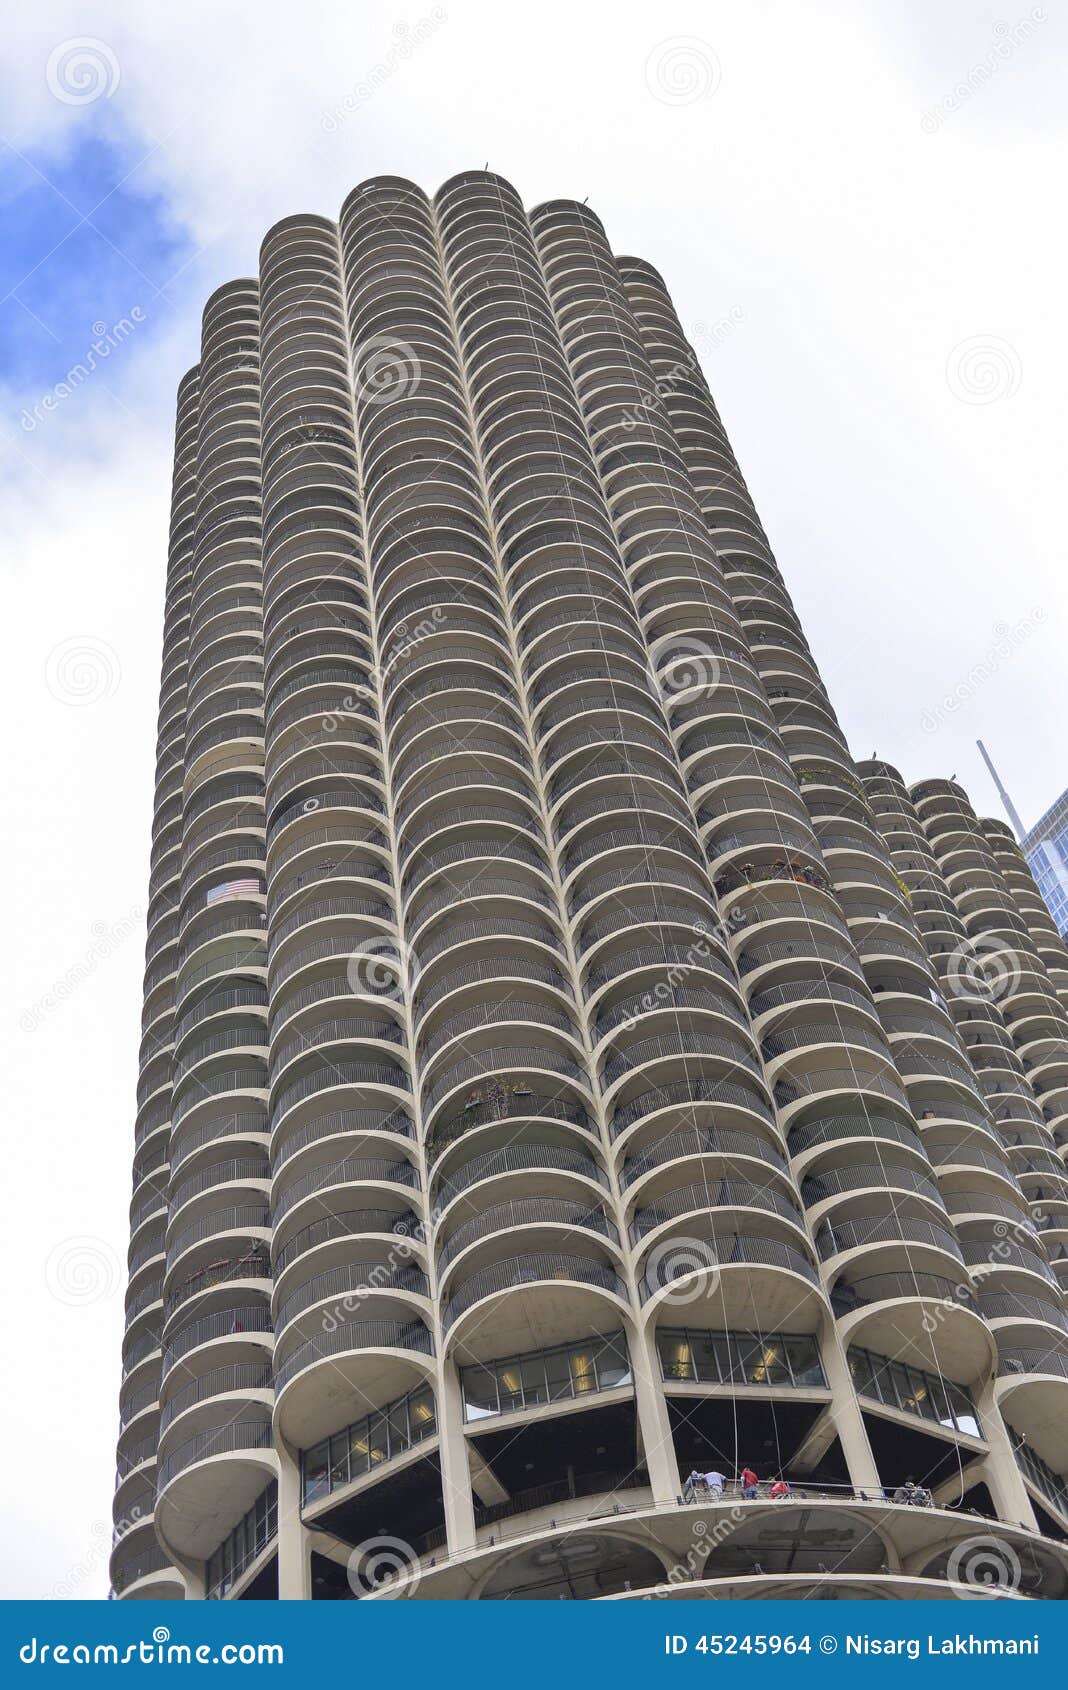 CHICAGO, ILLINOIS/ USA - 30th TUESDAY SEPTEMBER 2014 : Marina City is a complex of two 60-story towers built in 1964, seen as on september 30th in chicago.